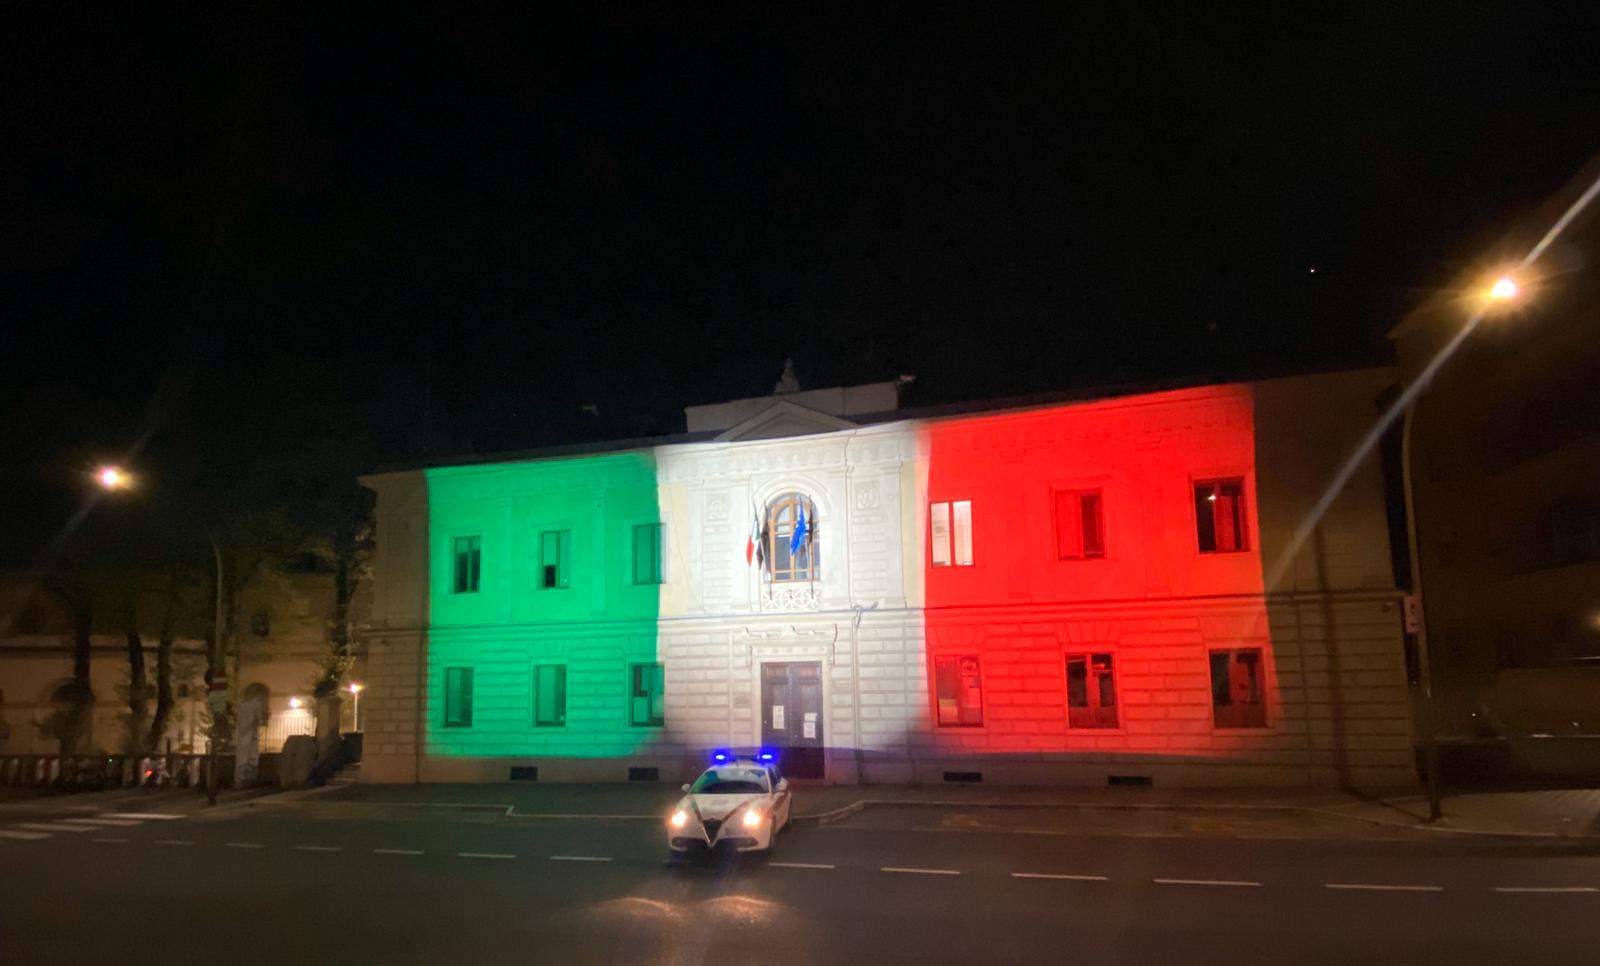 projection of the tricolor Siena